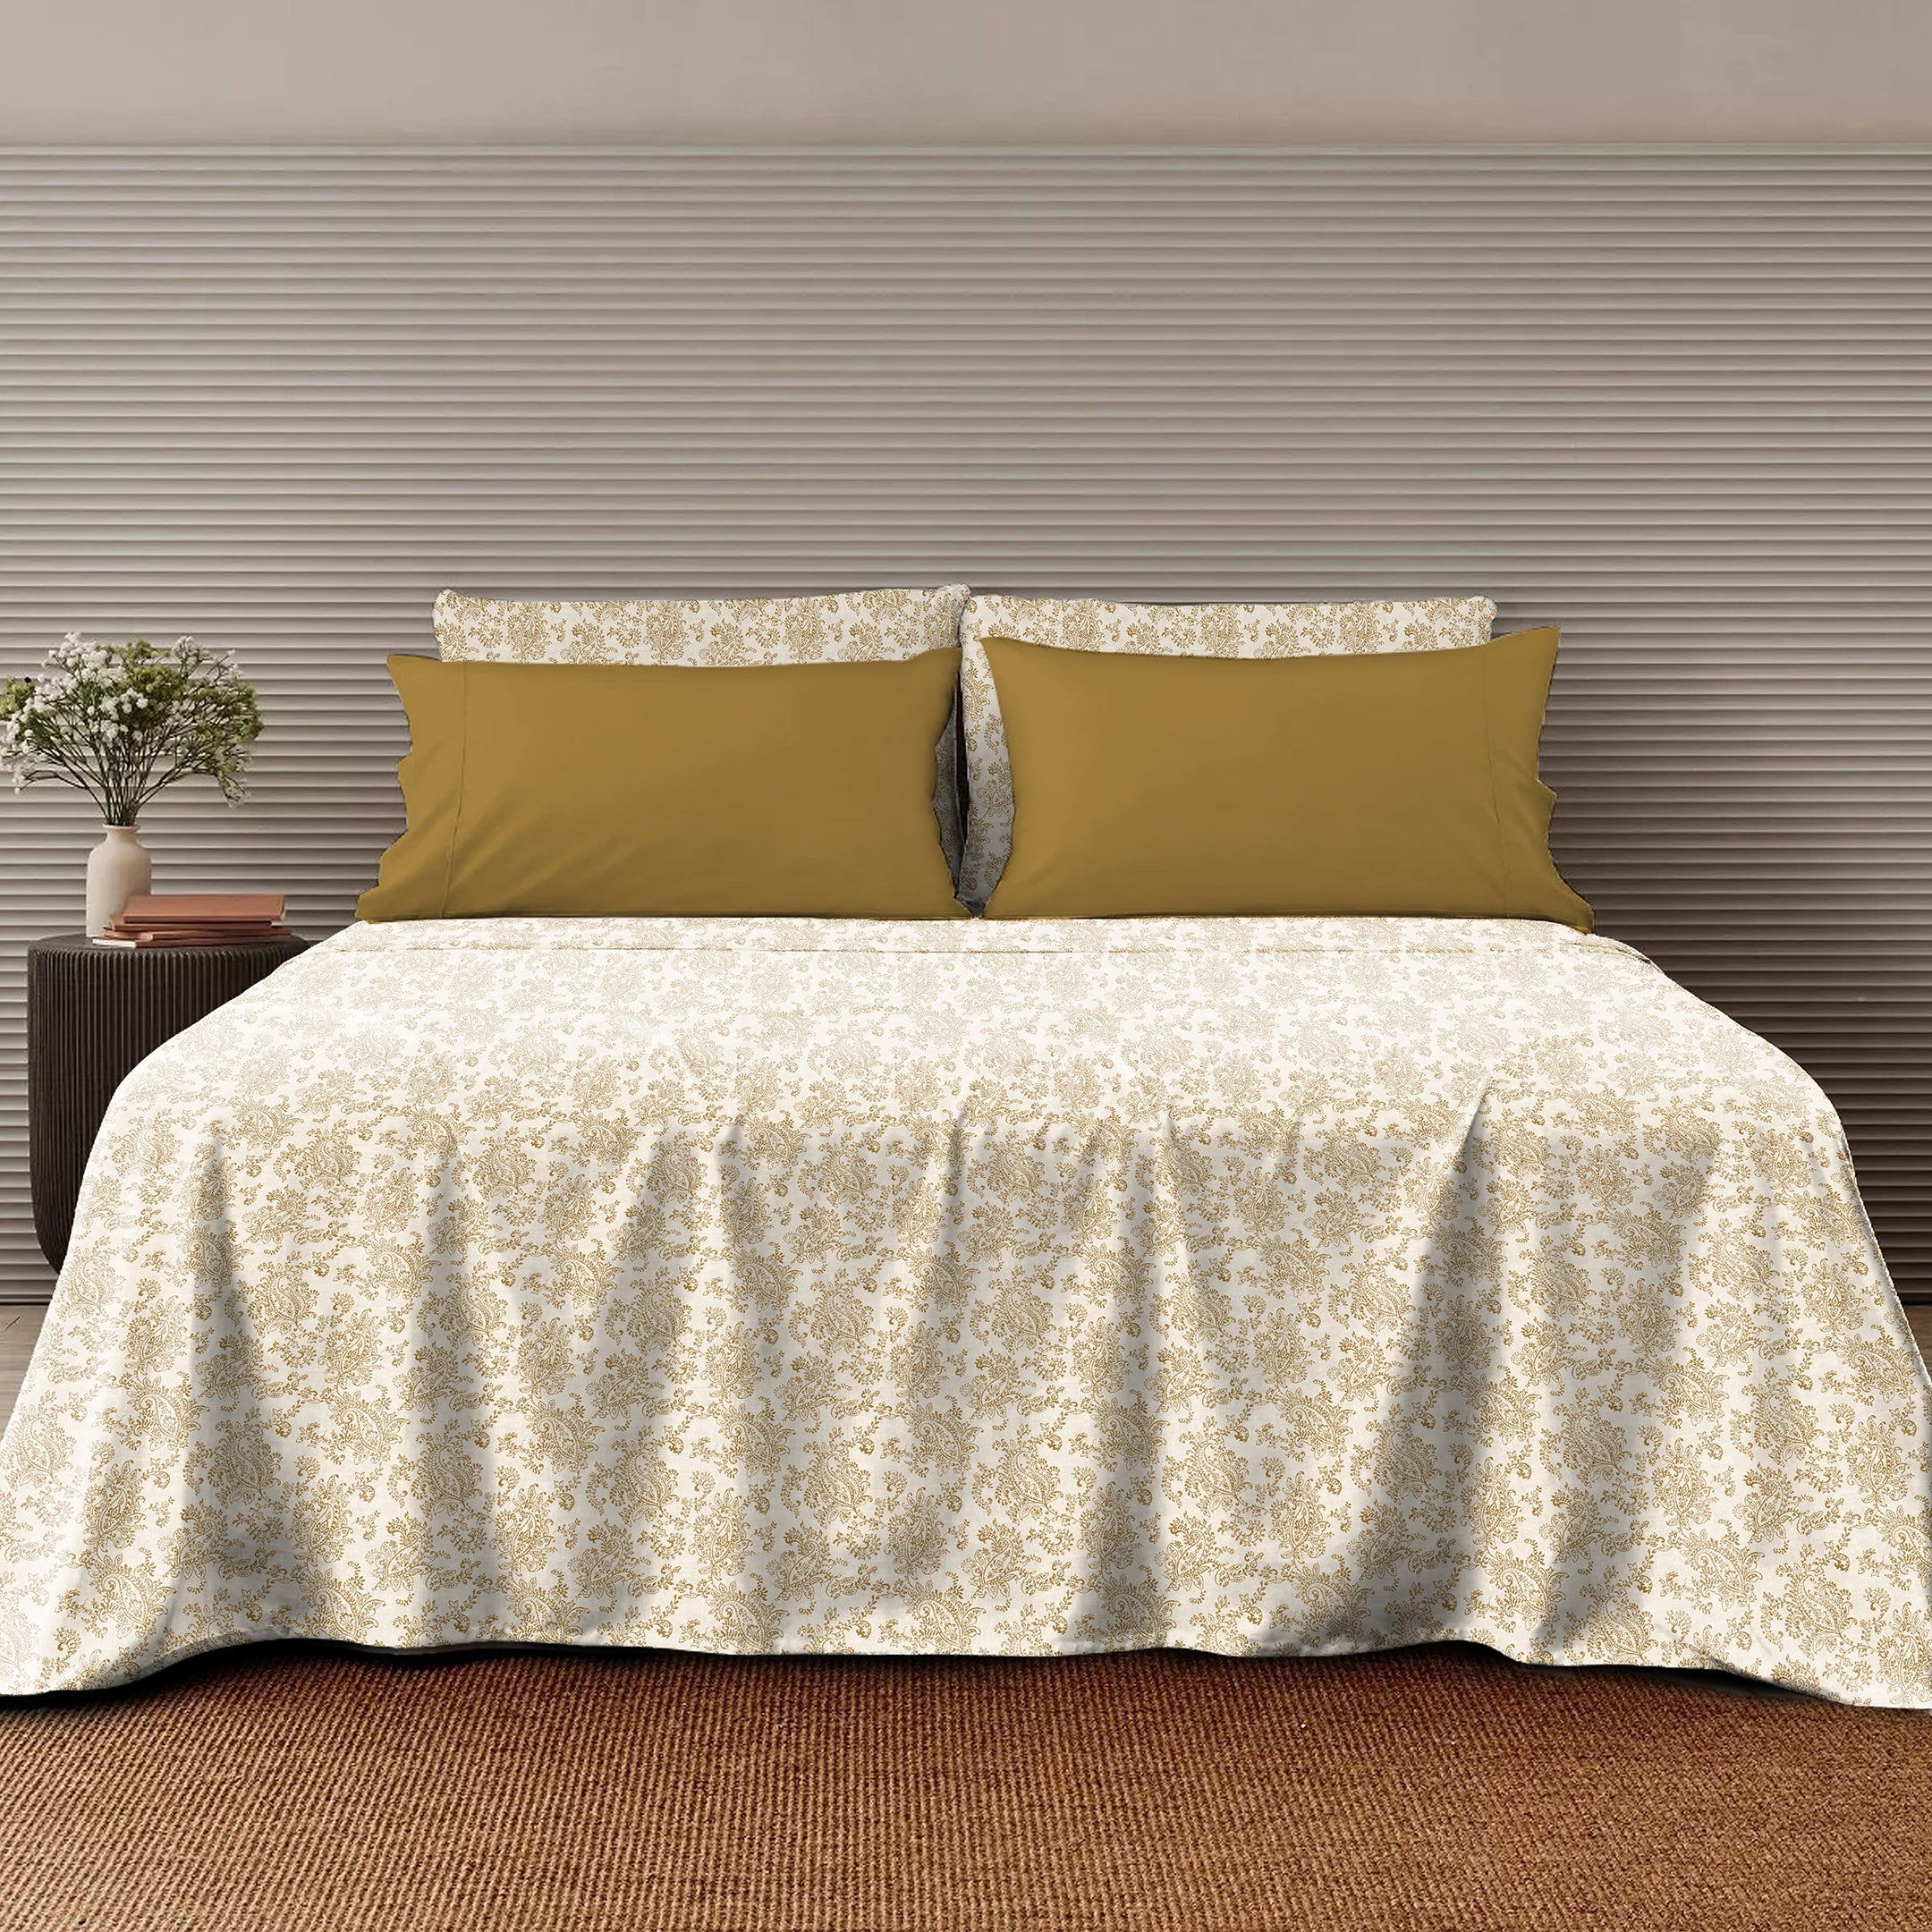 Jodhpur Flowers Bedsheet for Double Bed with 2 PillowCovers King Size (104" X 90") White And Camel